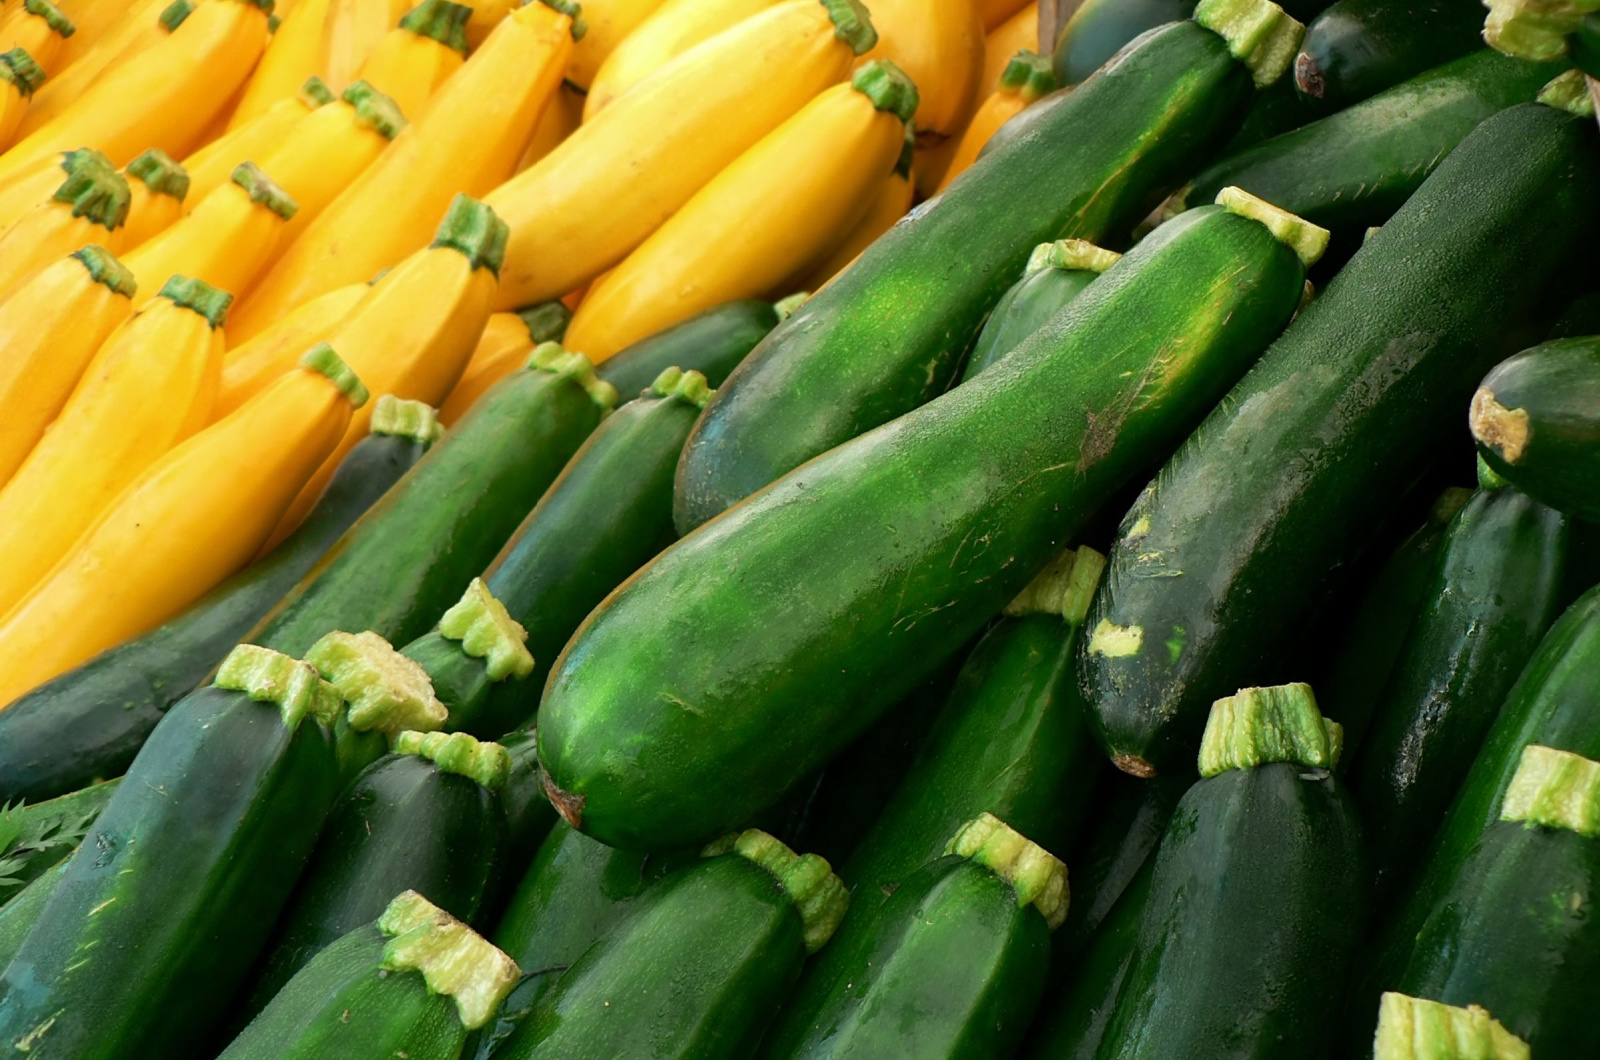 Yellow and green squash